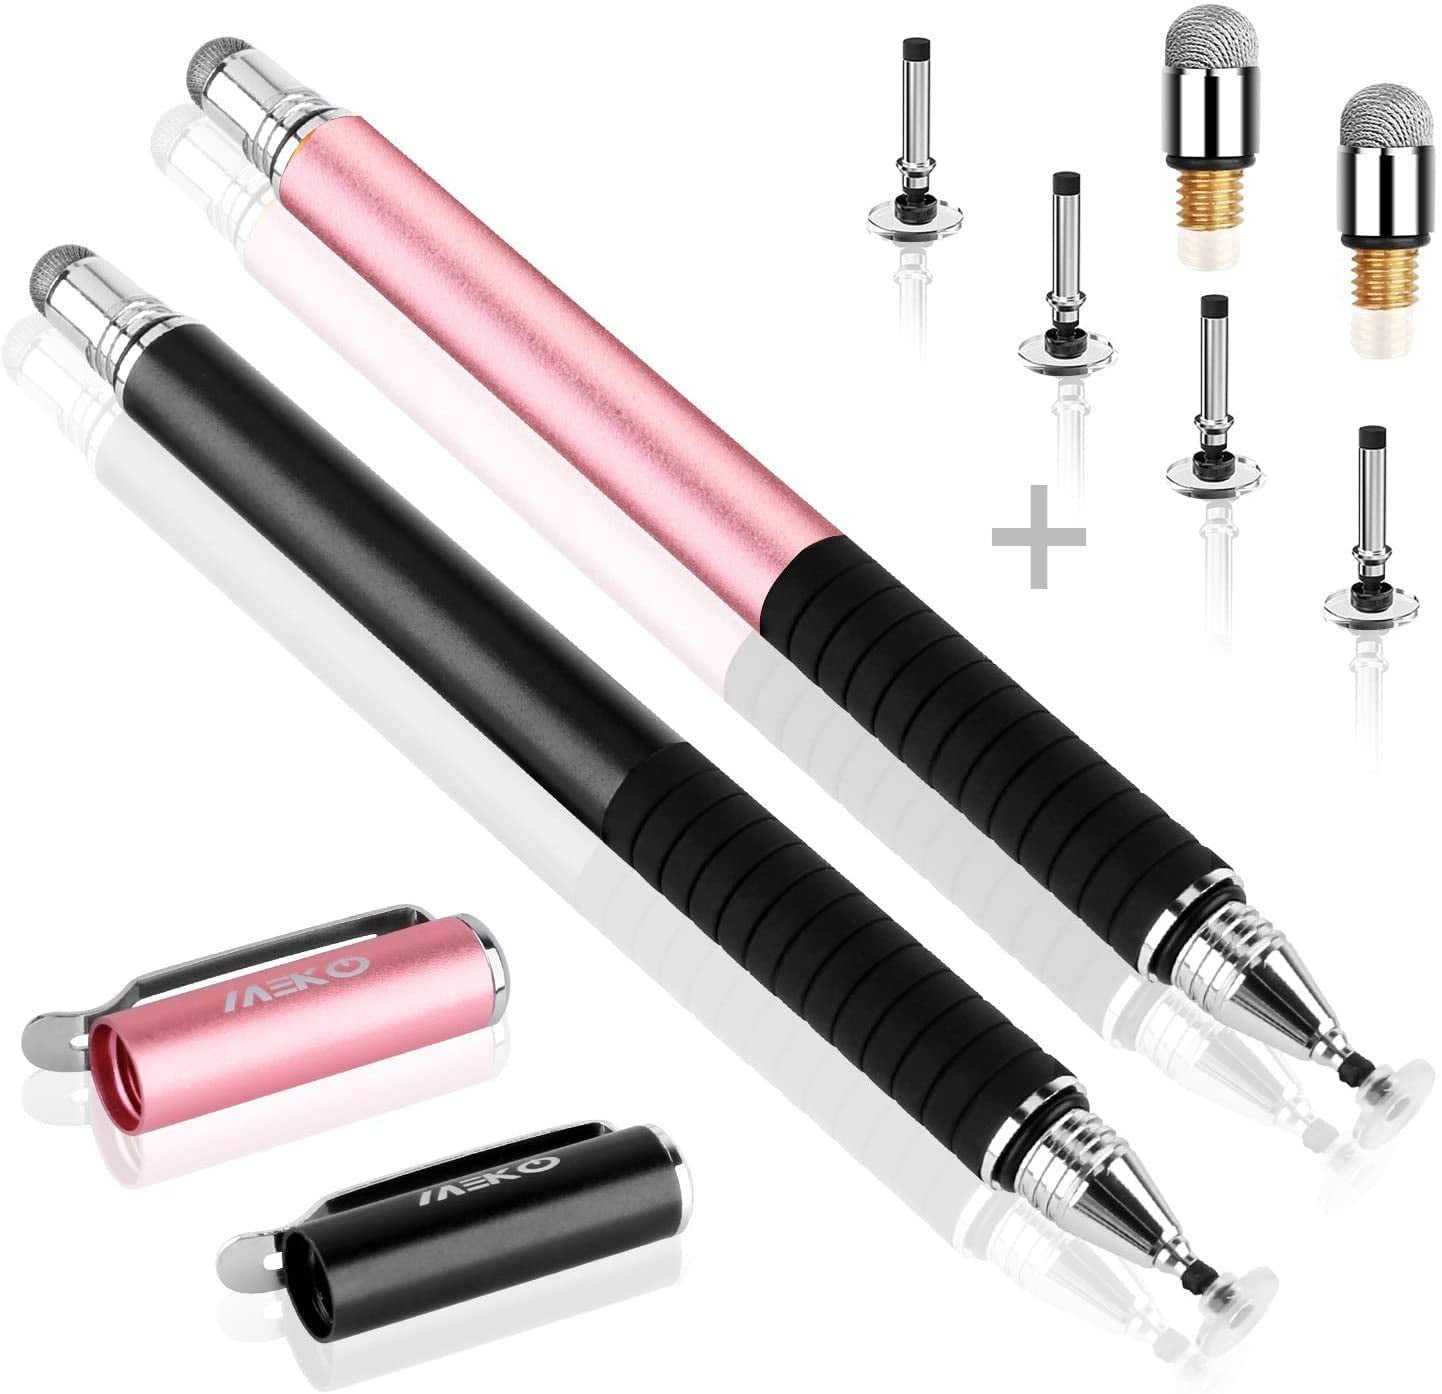 Rose Gold 1 Piece Universal Disc Stylus Compatible with Most Smart Devices Capacitive Stylus Pens for Touch Screens